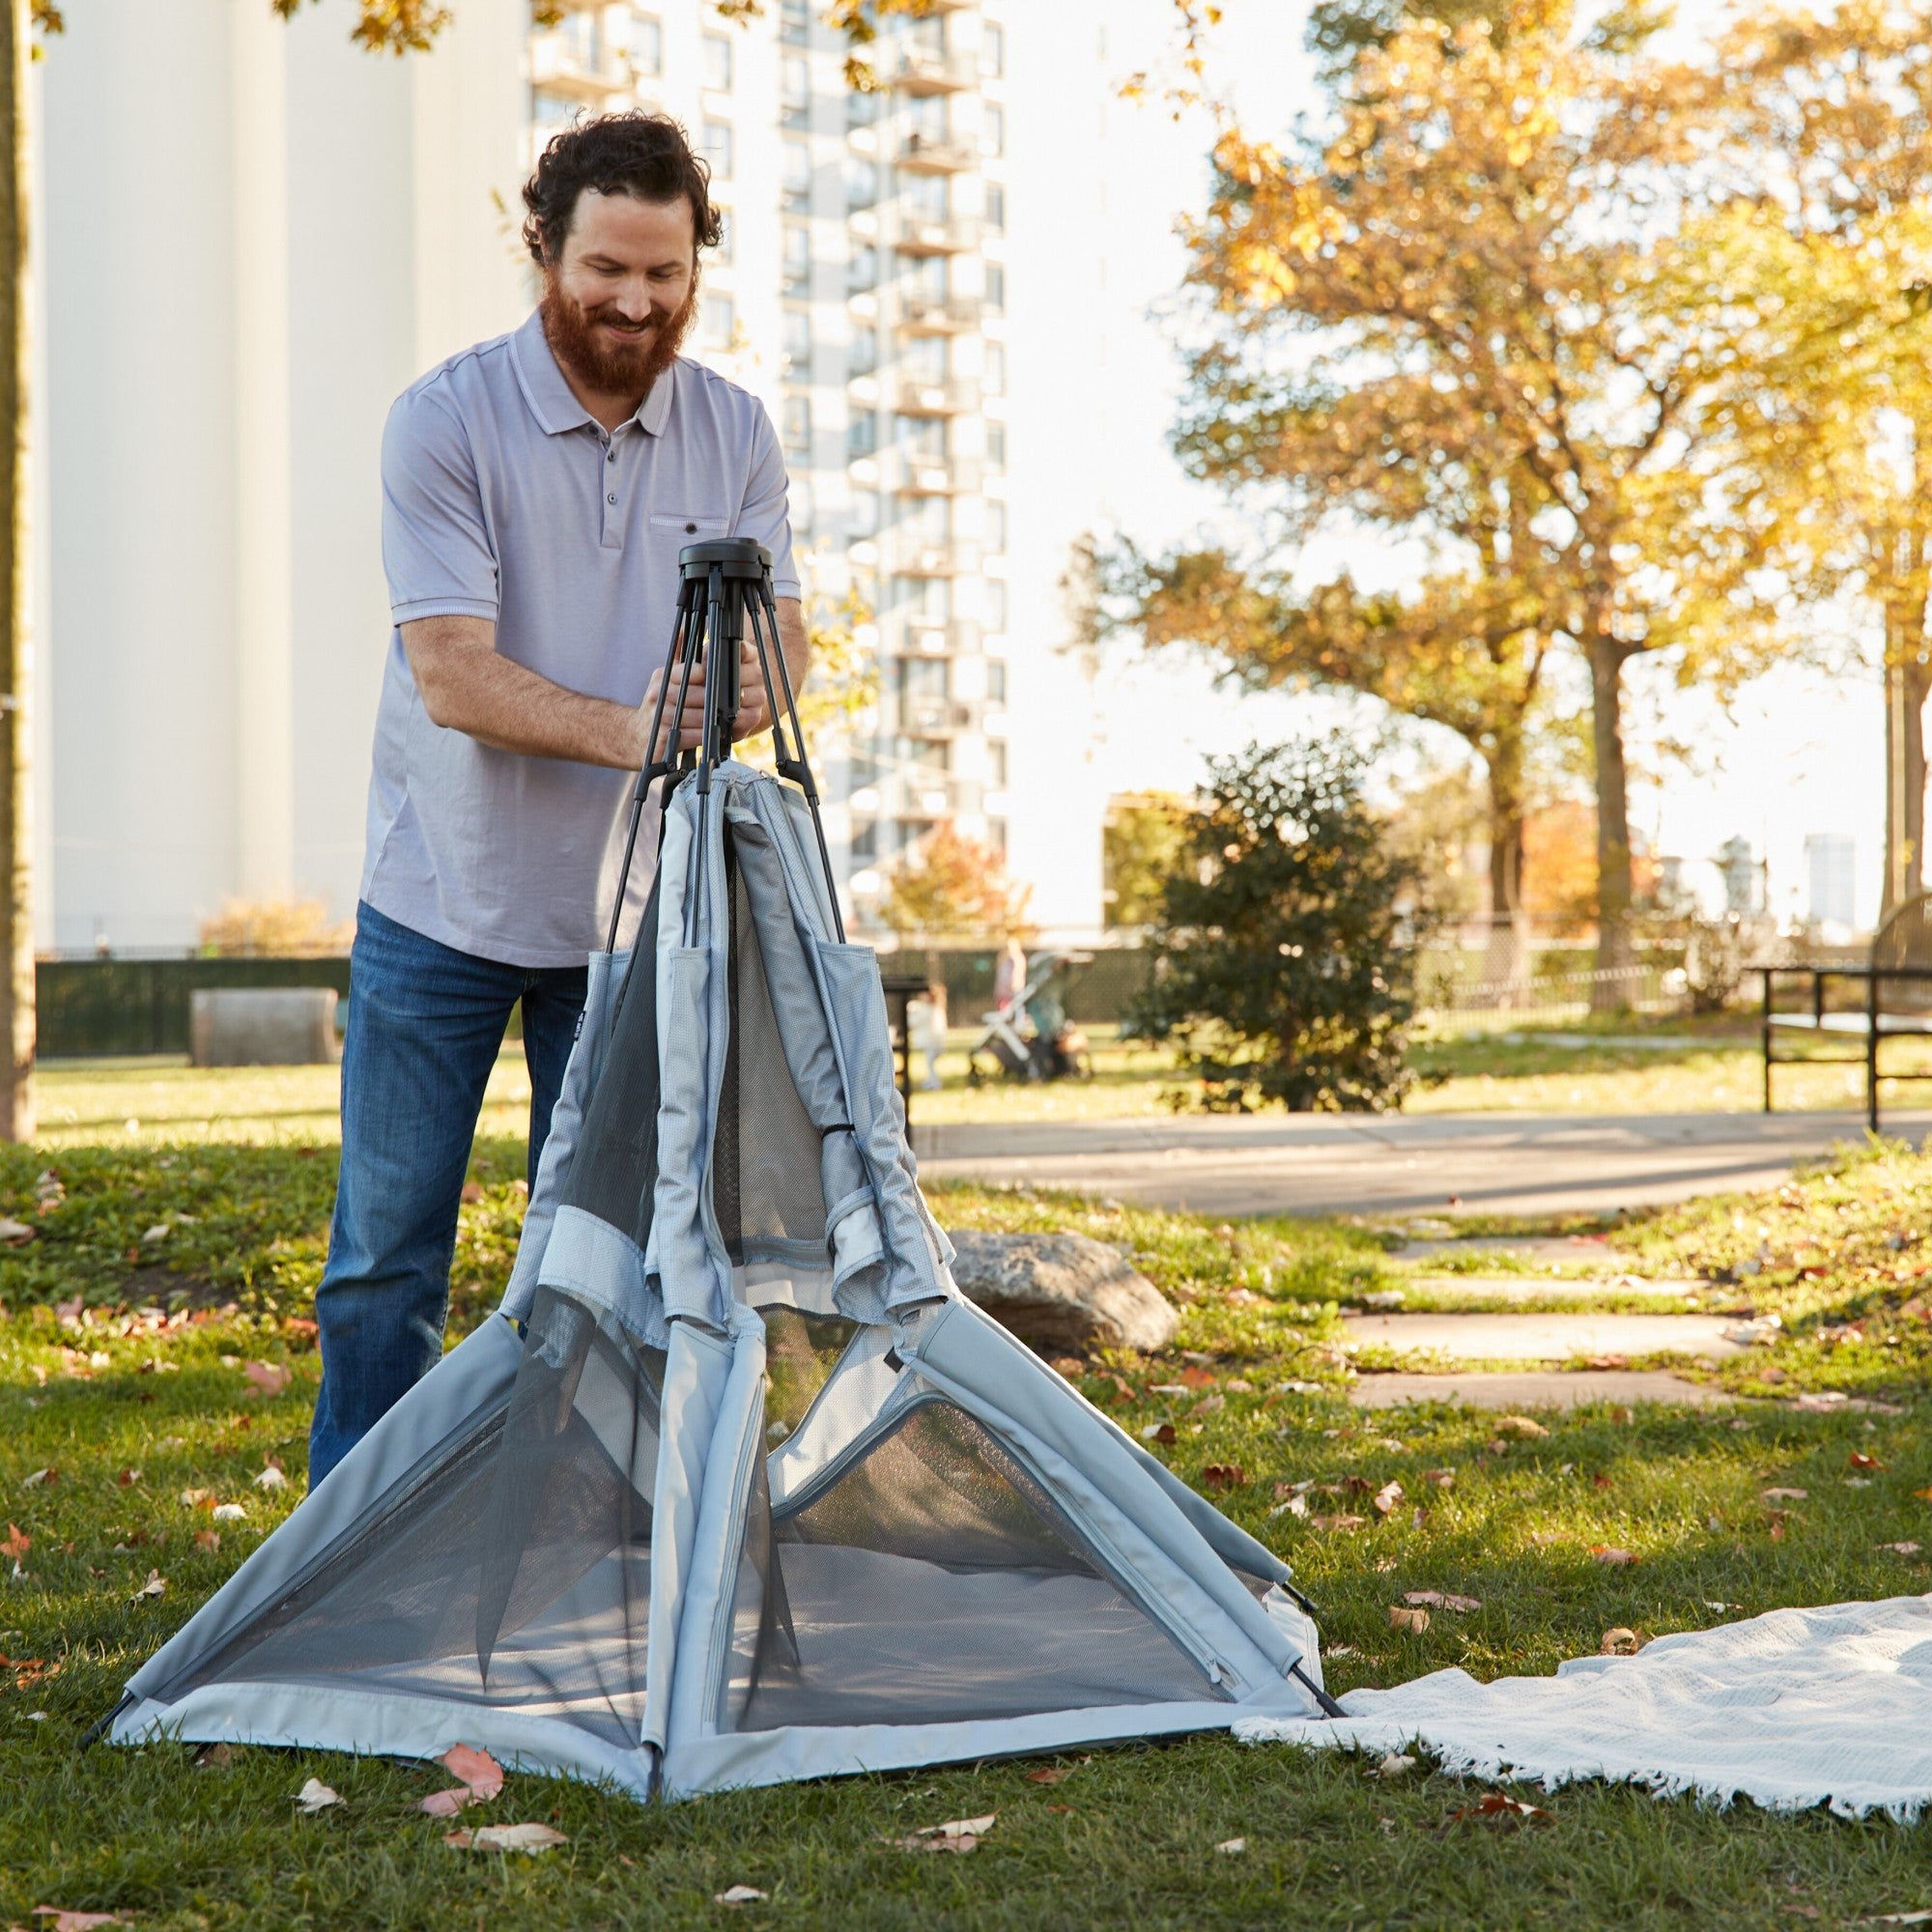 InstaPop Dome Play Yard - sturdy, lightweight, and perfect for travel